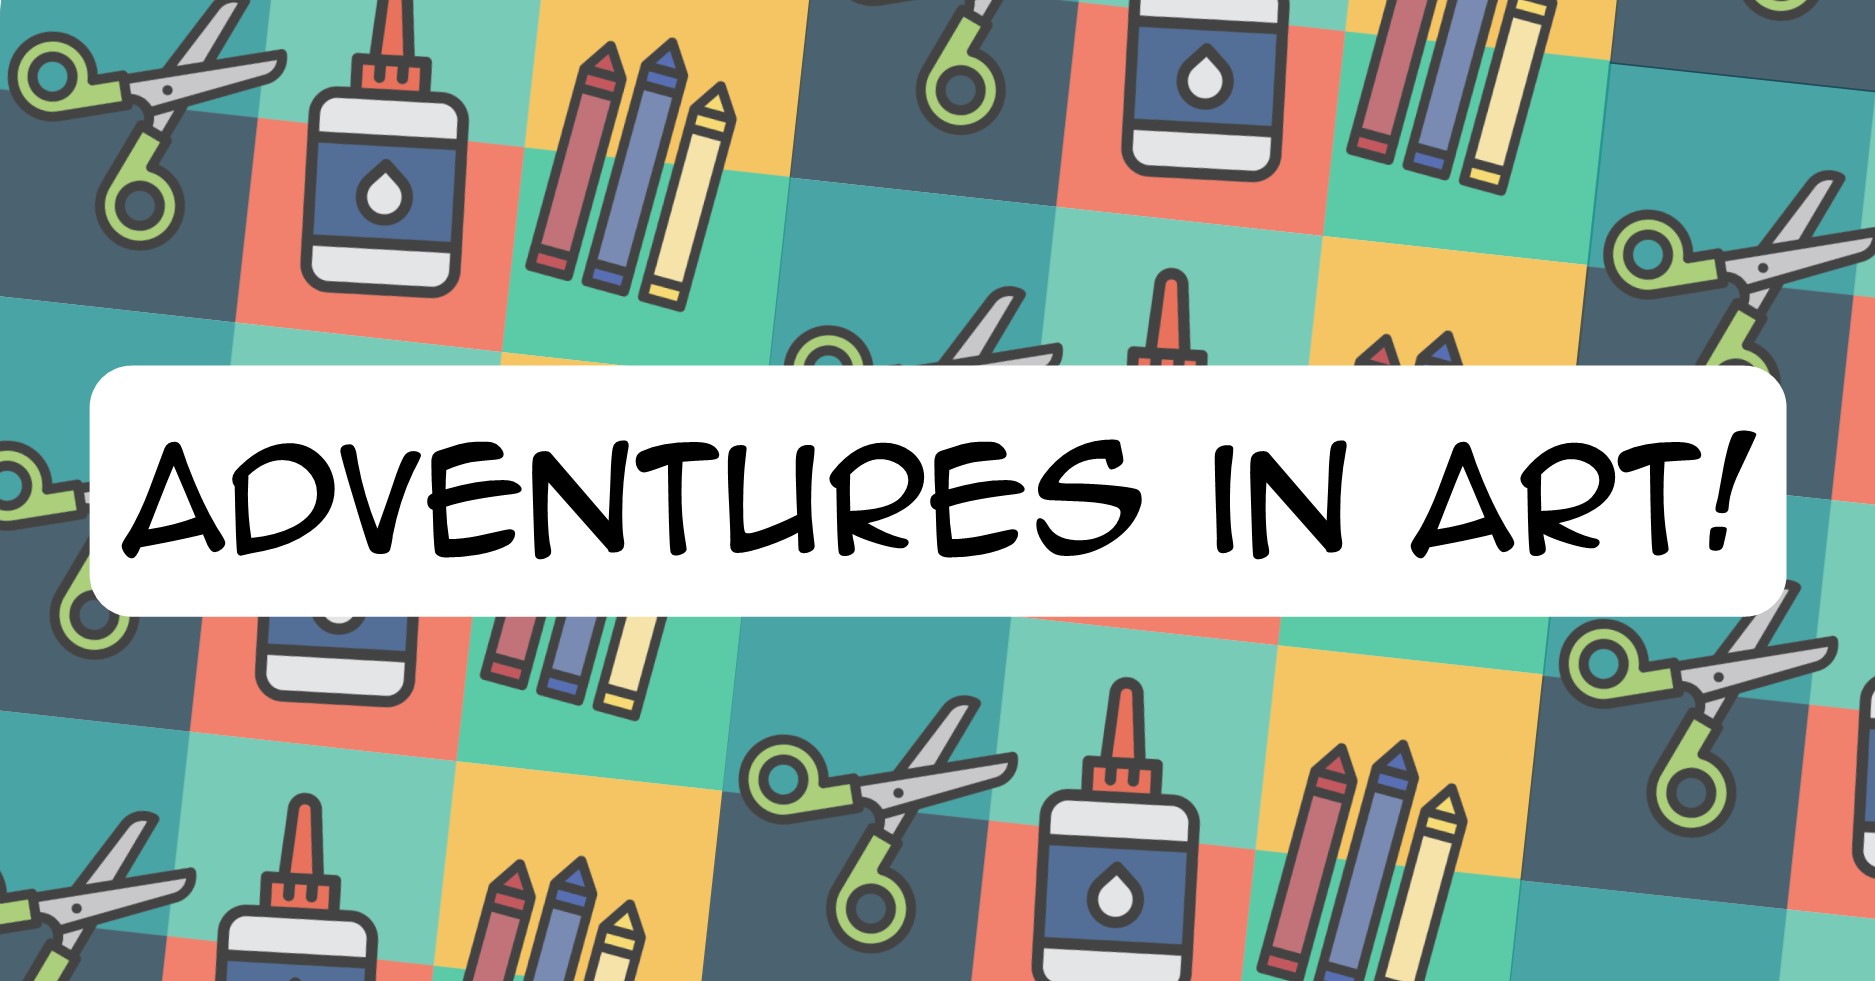 Text that says "Adventures in art!", with repeating background illustrations of glue, scissors, and crayons.